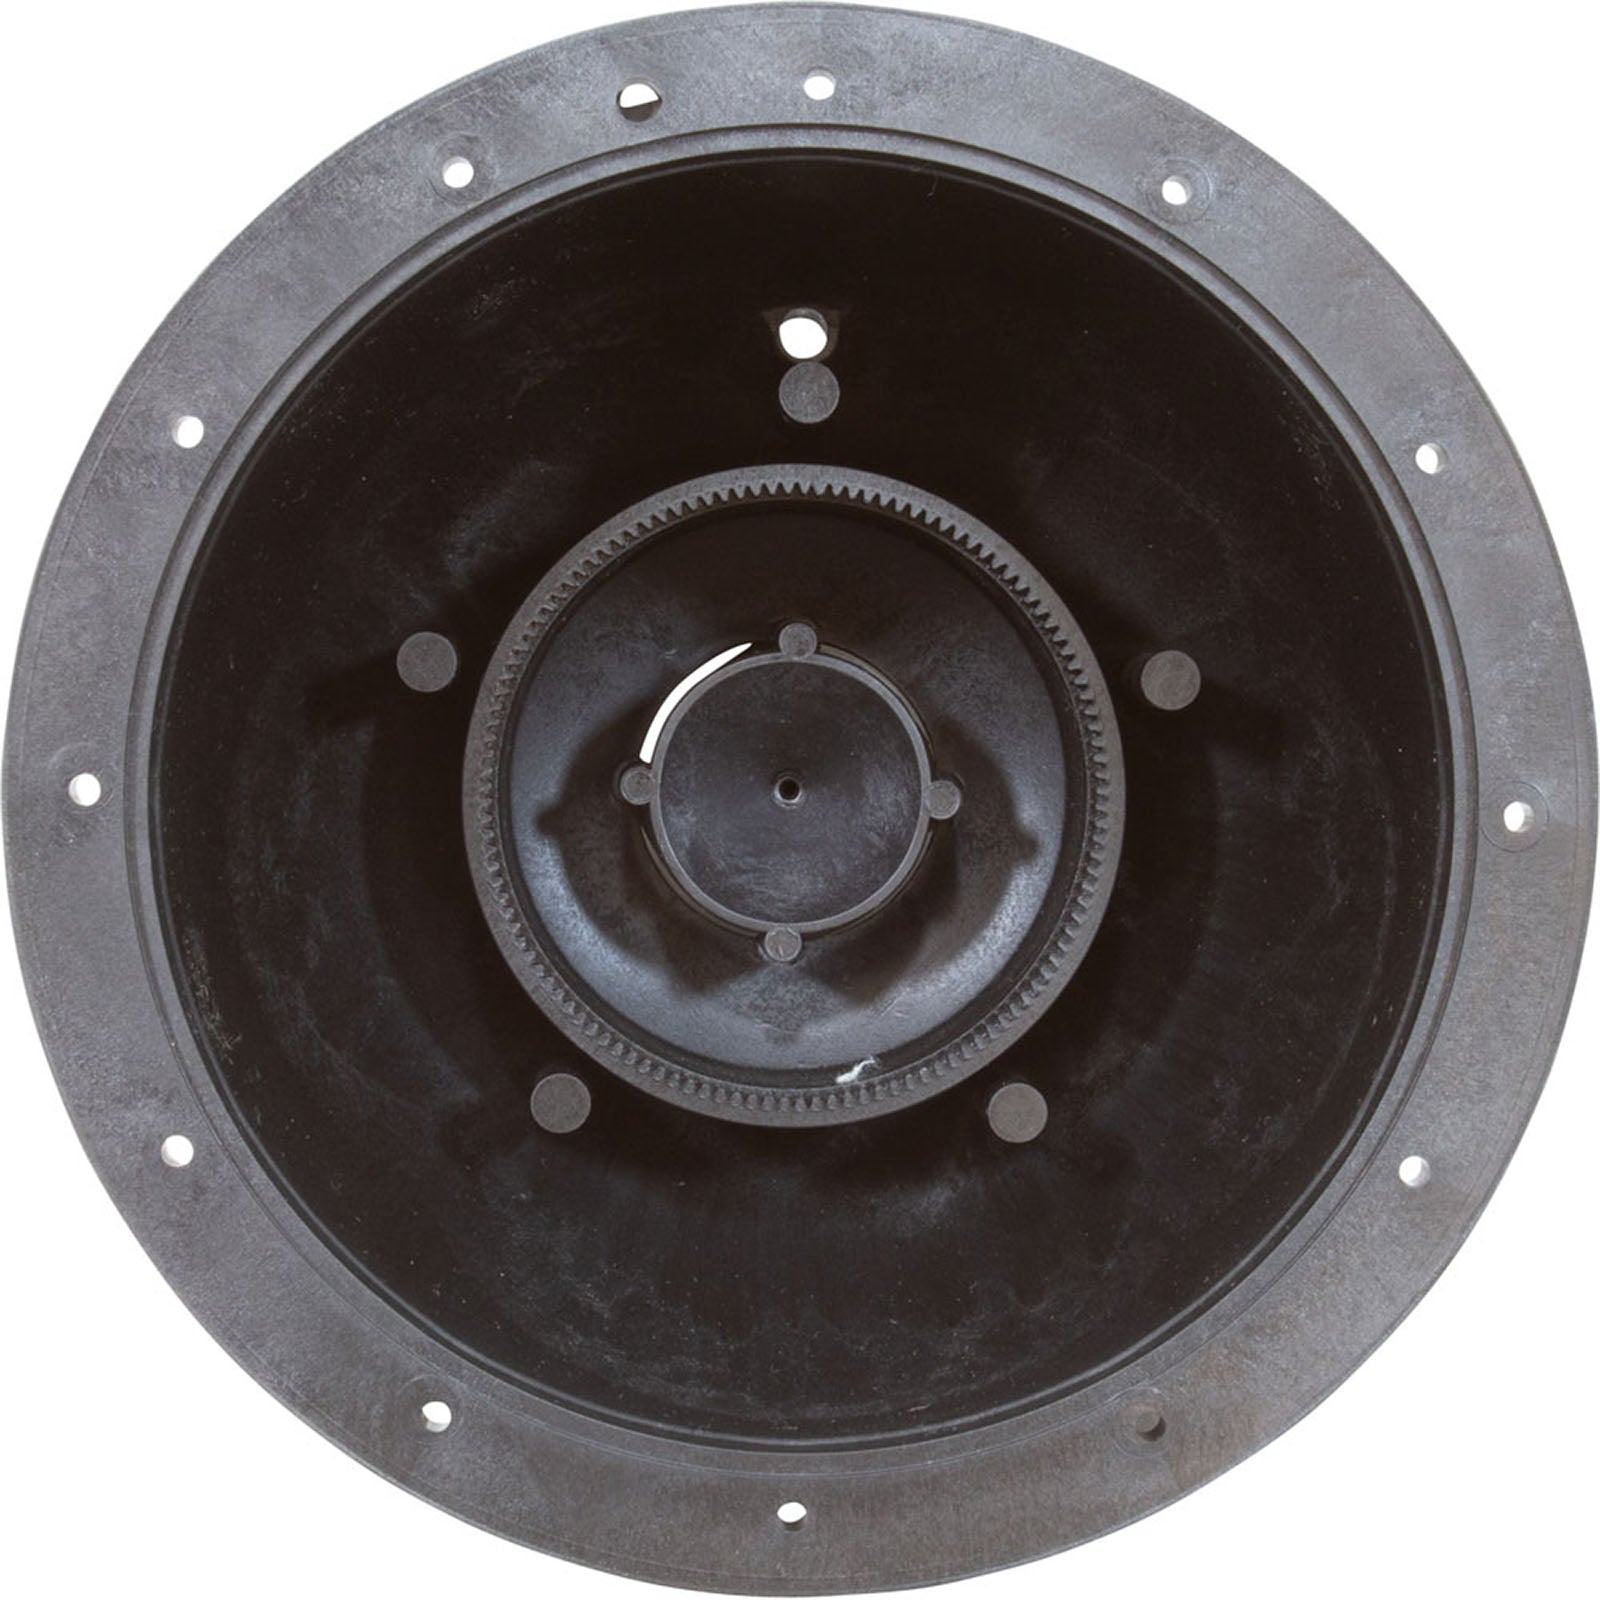 Zodiac Top Housing With Threaded Union Adapter, 3-9-211